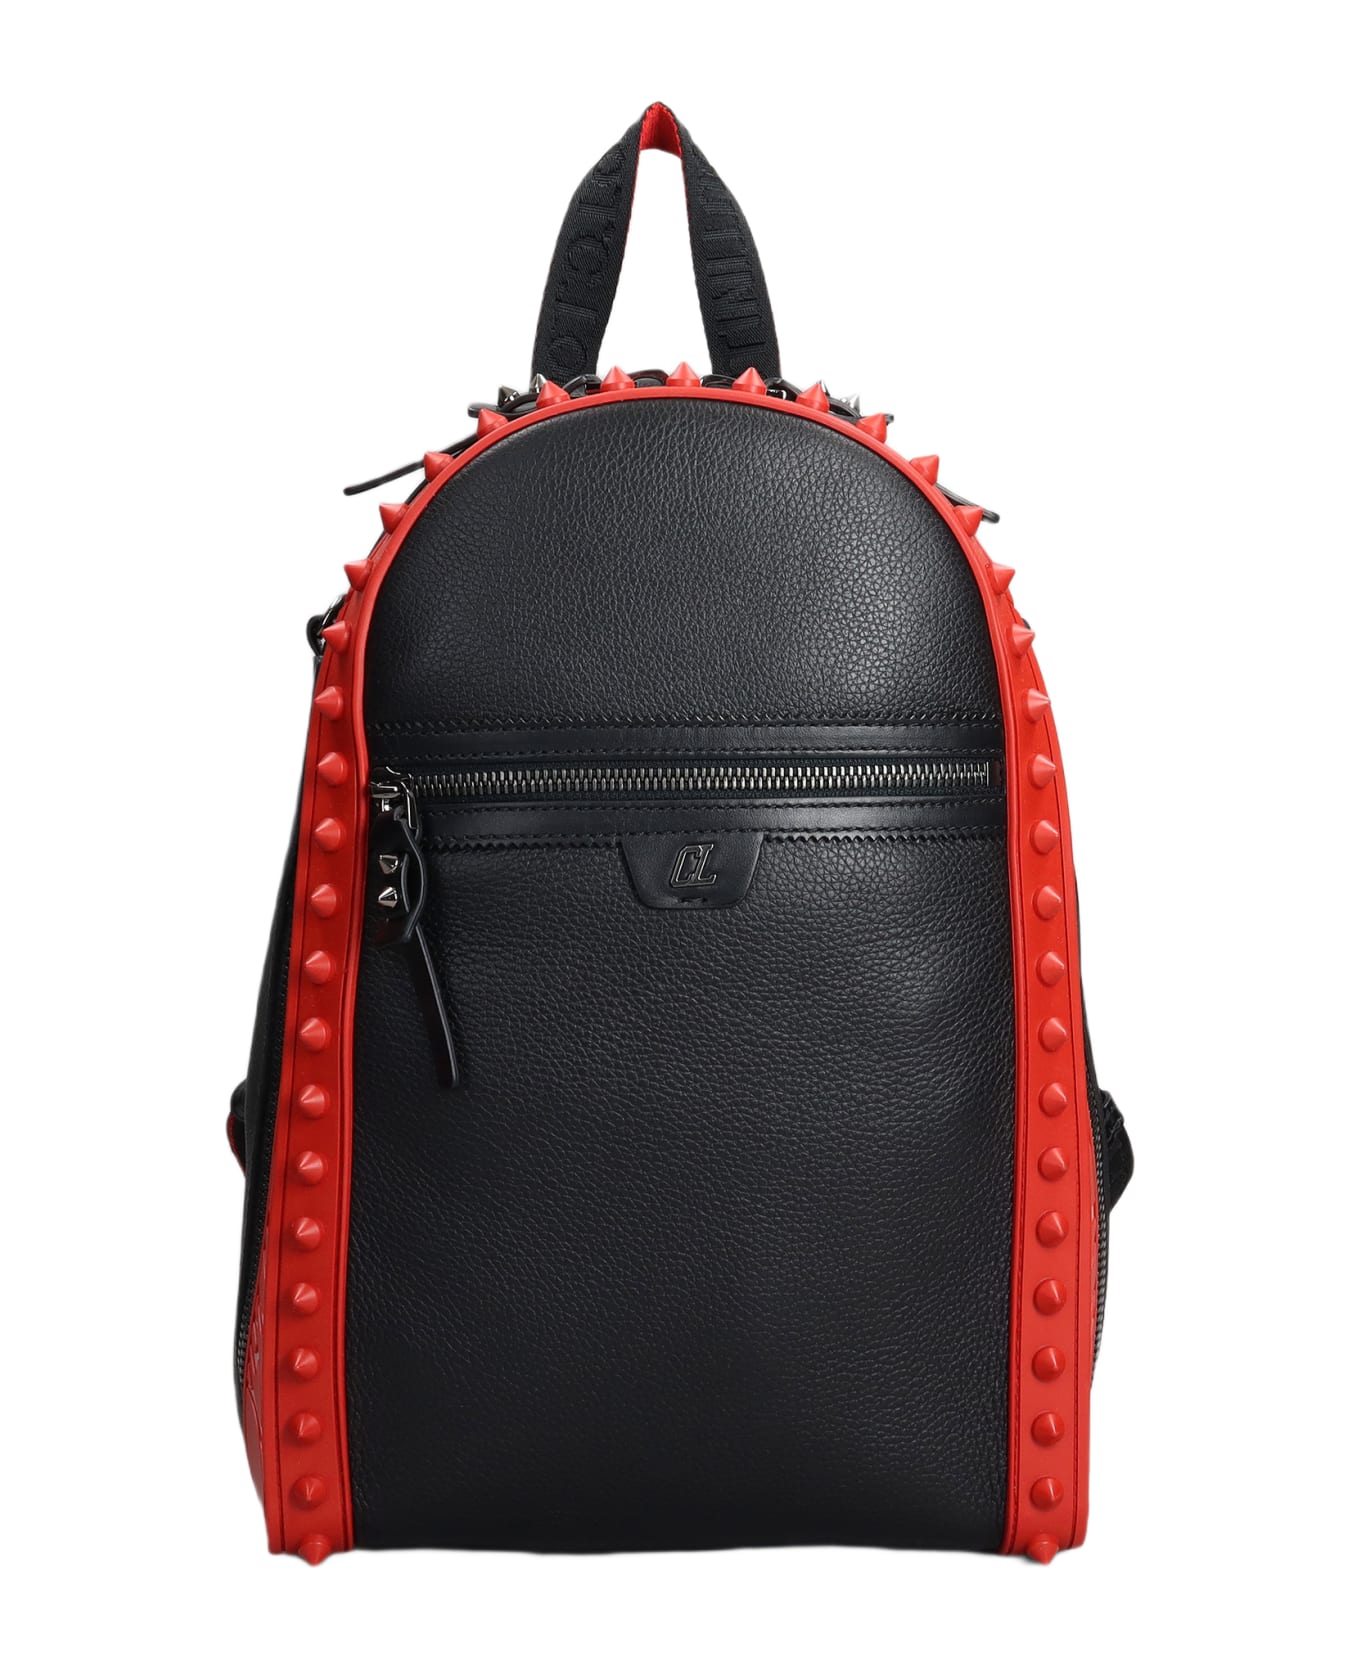 Christian Louboutin Backpack In Black Leather - black バックパック